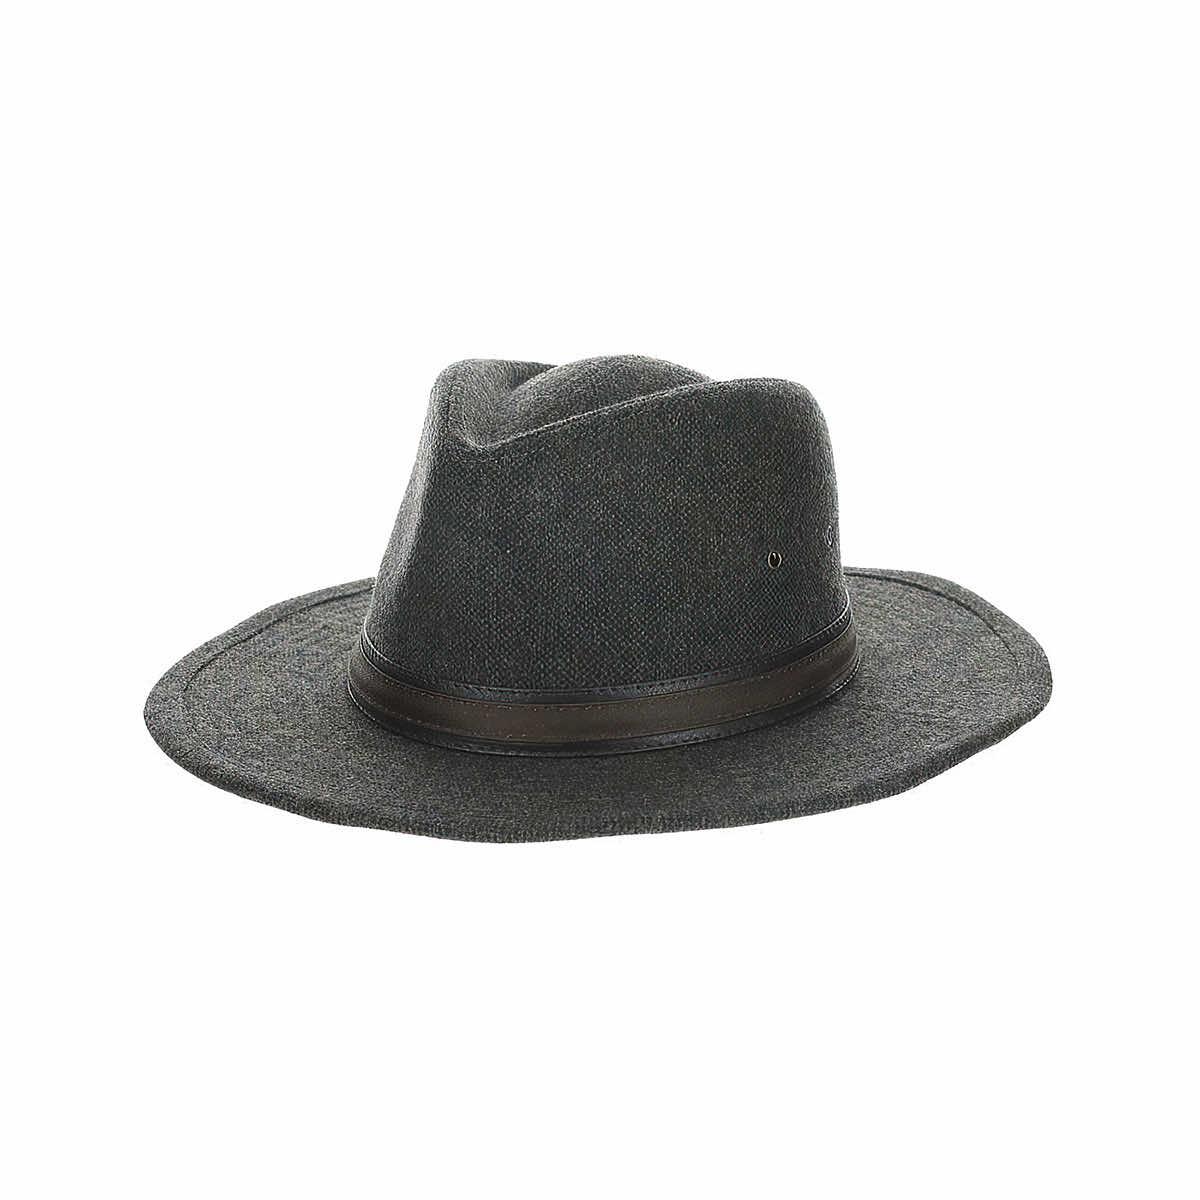 dorfman pacific outback hat